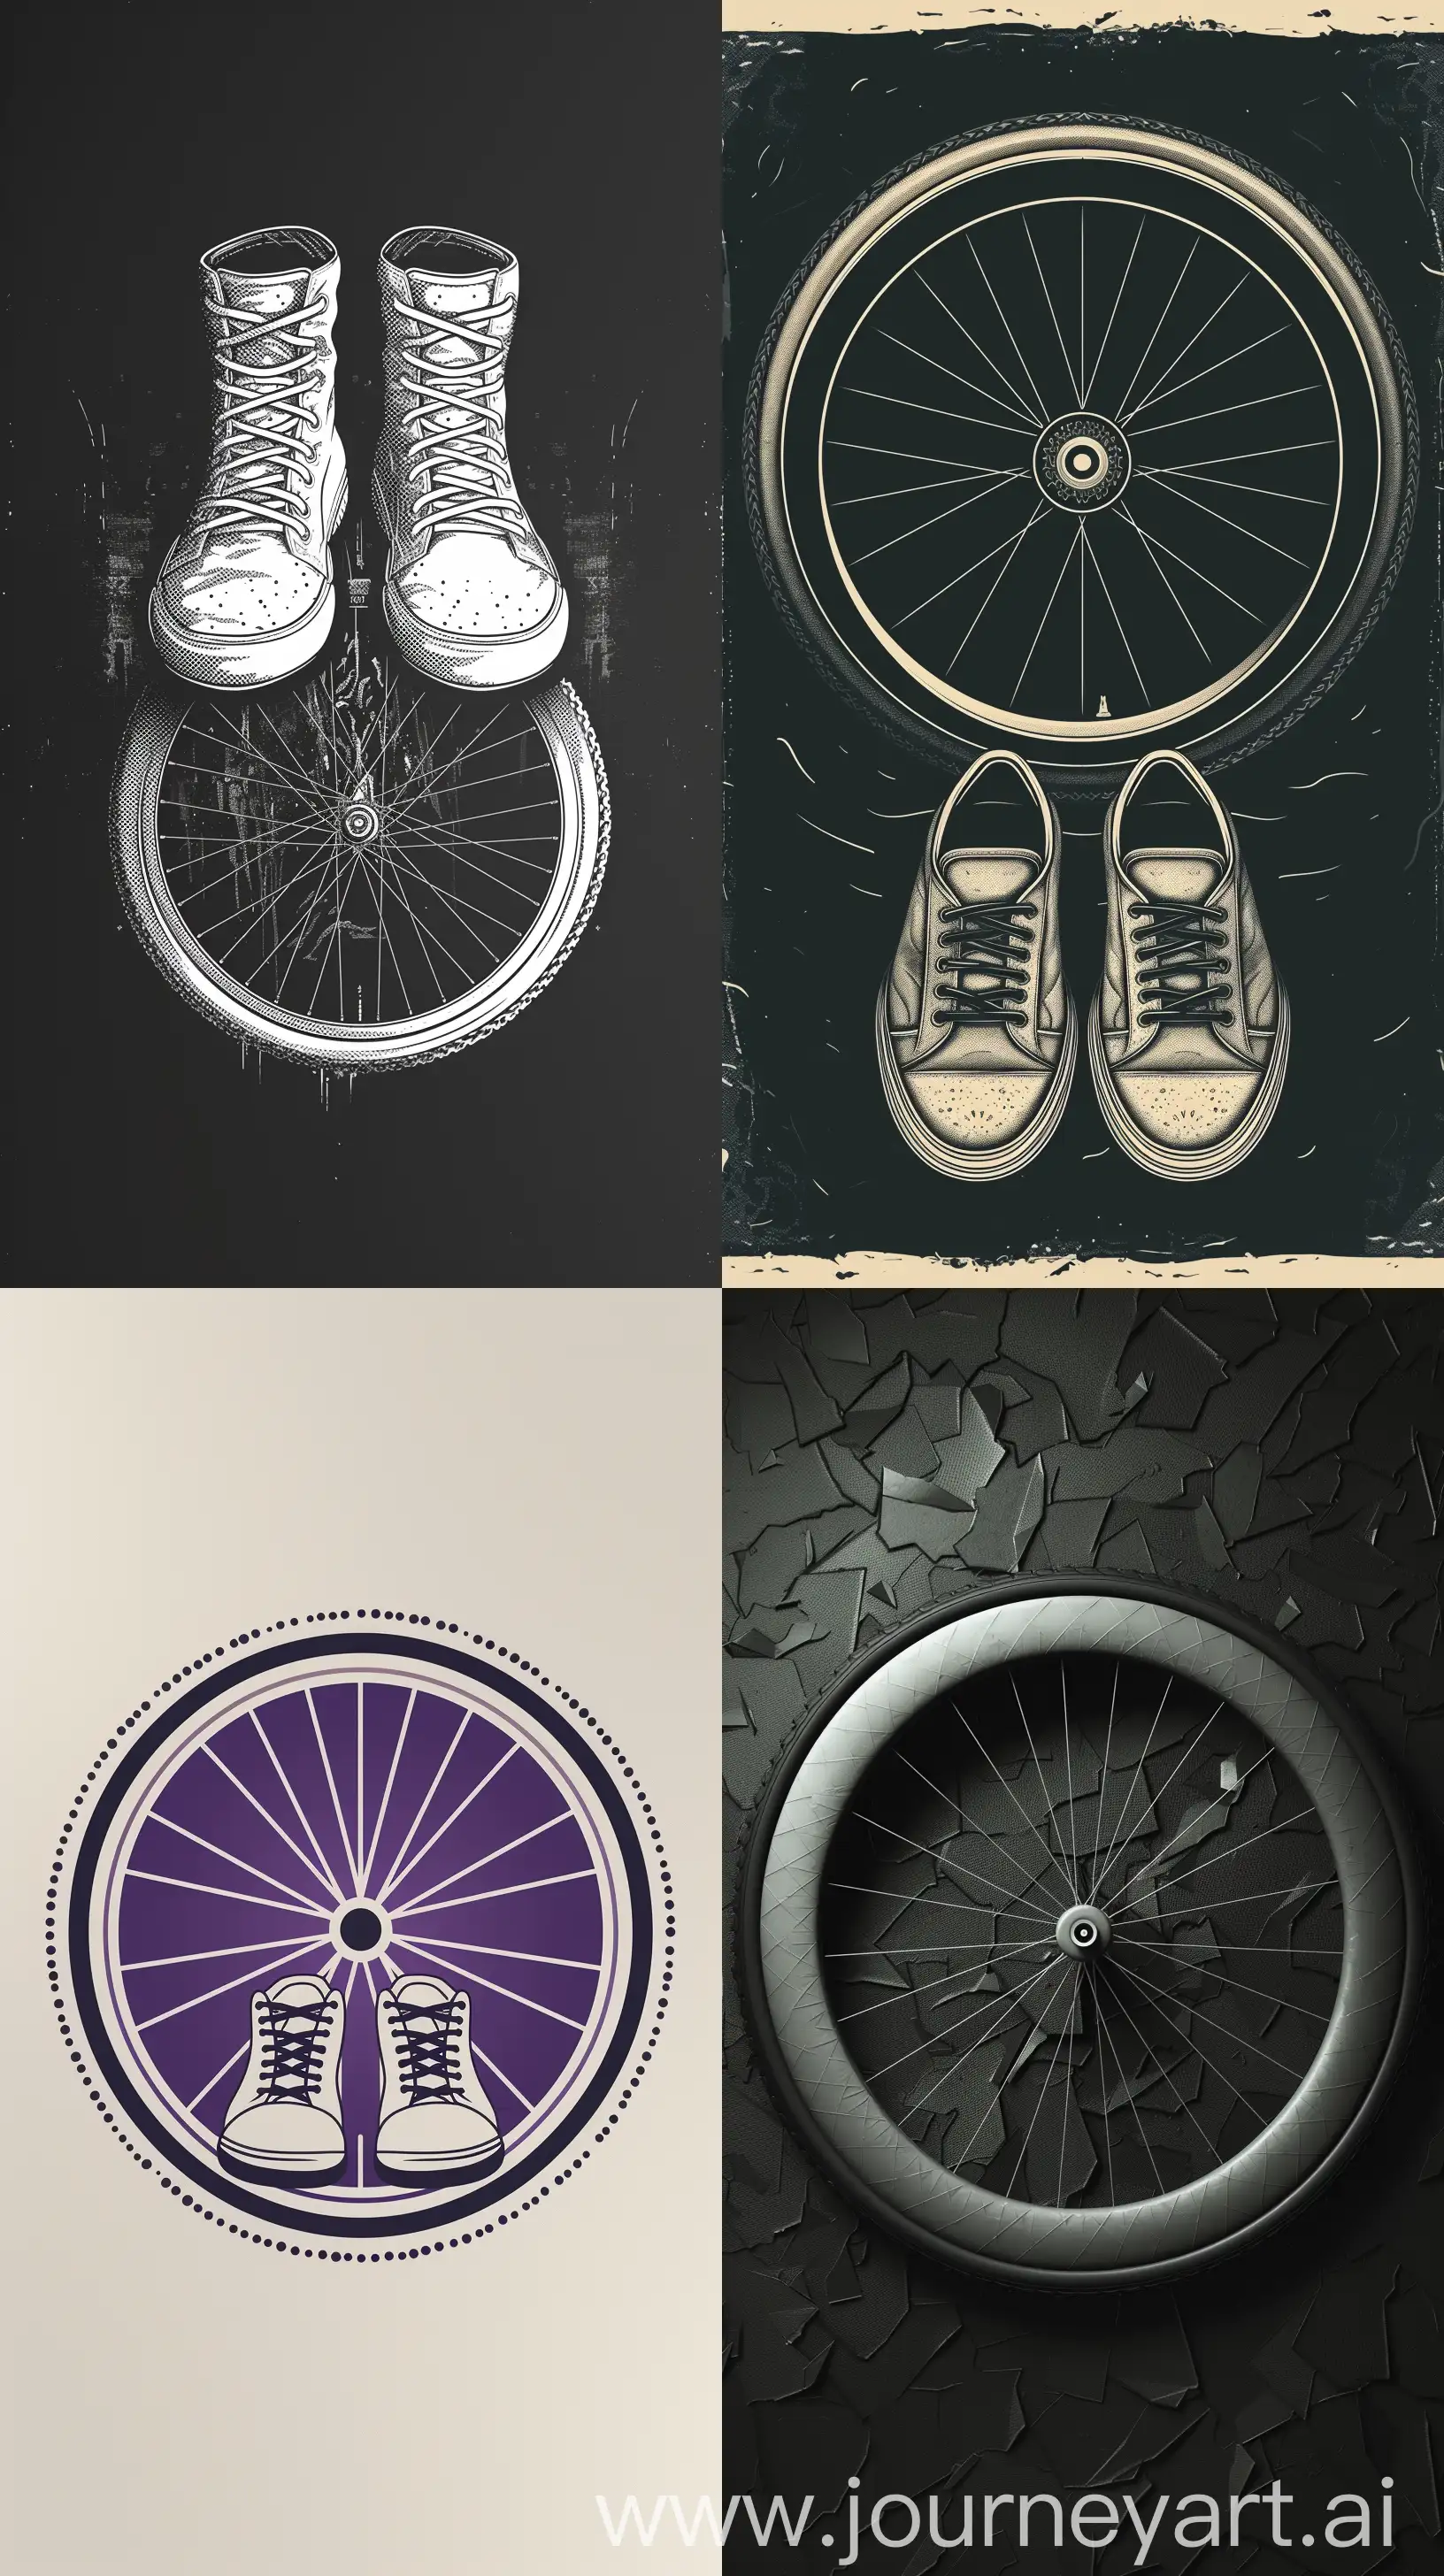 A logo design with . Bike Wheel with Shoes Design: A stylized bicycle wheel is combined with shoes, symbolizing the seamless integration of biking and footwear. The color scheme could be black, white, and shades of grey to represent the tire treads and shoe materials.  [Create a logo for a bike shoe product] . use this image as an example  
[https://image.pollinations.ai/prompt/Bike%20Wheel%20with%20Shoes%20Design:%20A%20stylized%20bicycle%20wheel%20is%20combined%20with%20shoes,%20symbolizing%20the%20seamless%20integration%20of%20biking%20and%20footwear.%20The%20color%20scheme%20could%20be%20black,%20white,%20and%20shades%20of%20grey%20to%20represent%20the%20tire%20treads%20and%20shoe%20materials%20Create%20a%20logo%20for%20a%20bike%20shoe%20?nofeed=true&nologo=true] --ar 9:16 --stylize 750 --v 6